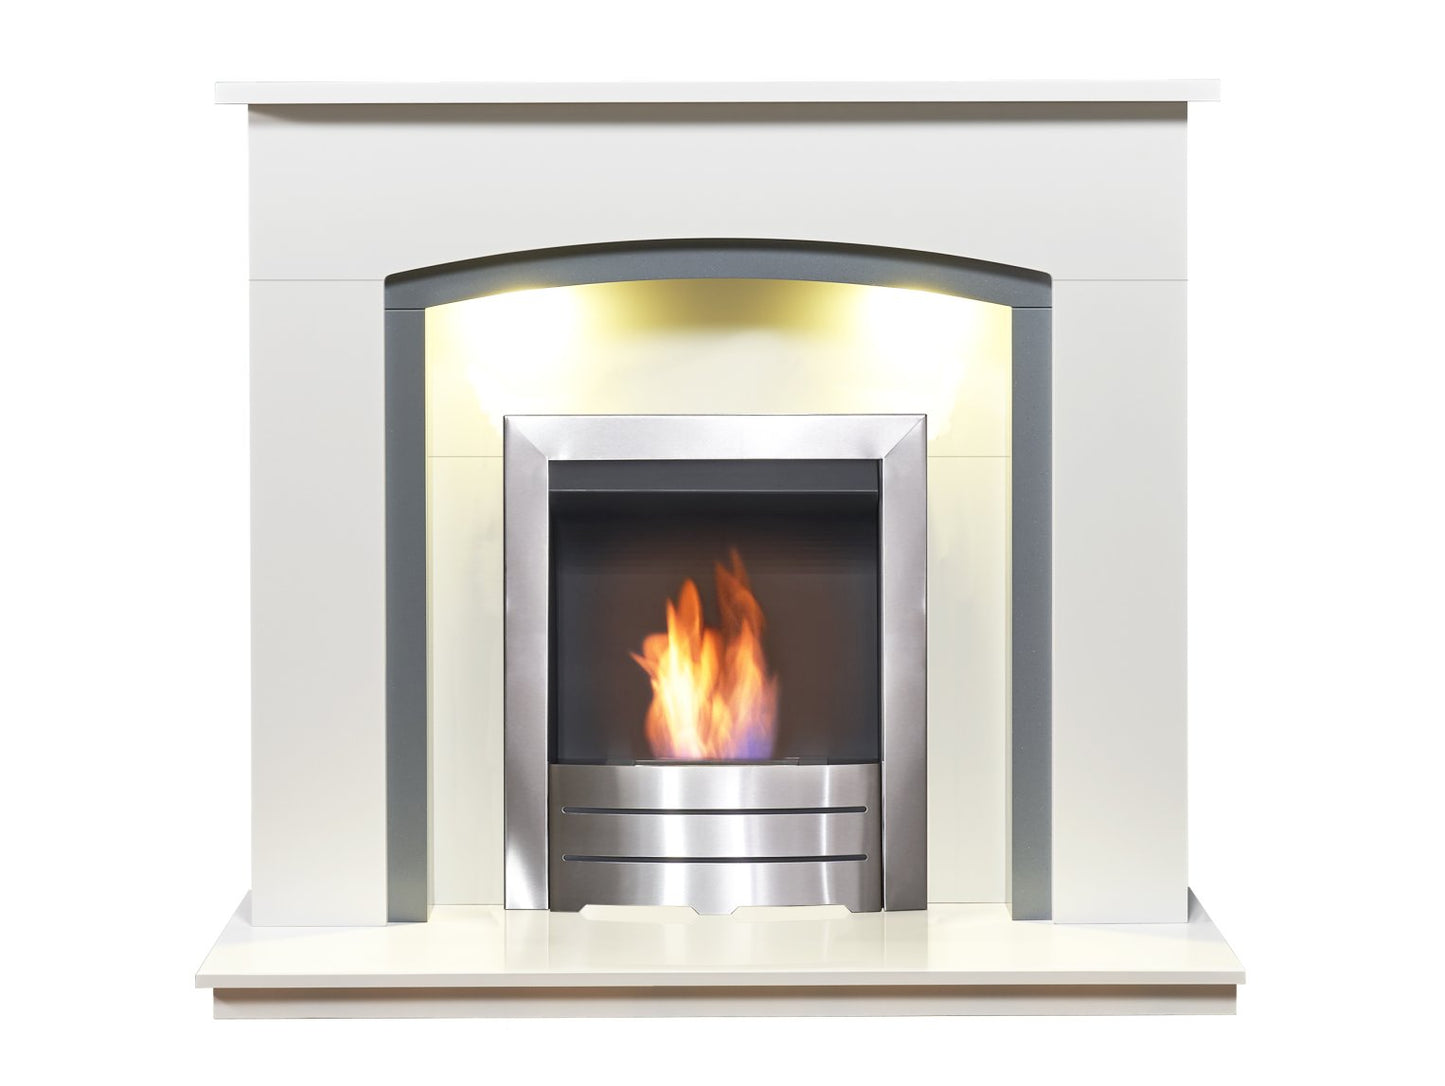 Adam Tuscany Fireplace in Pure White & Grey with Colorado Bio Ethanol Fire in Brushed Steel, 48 Inch